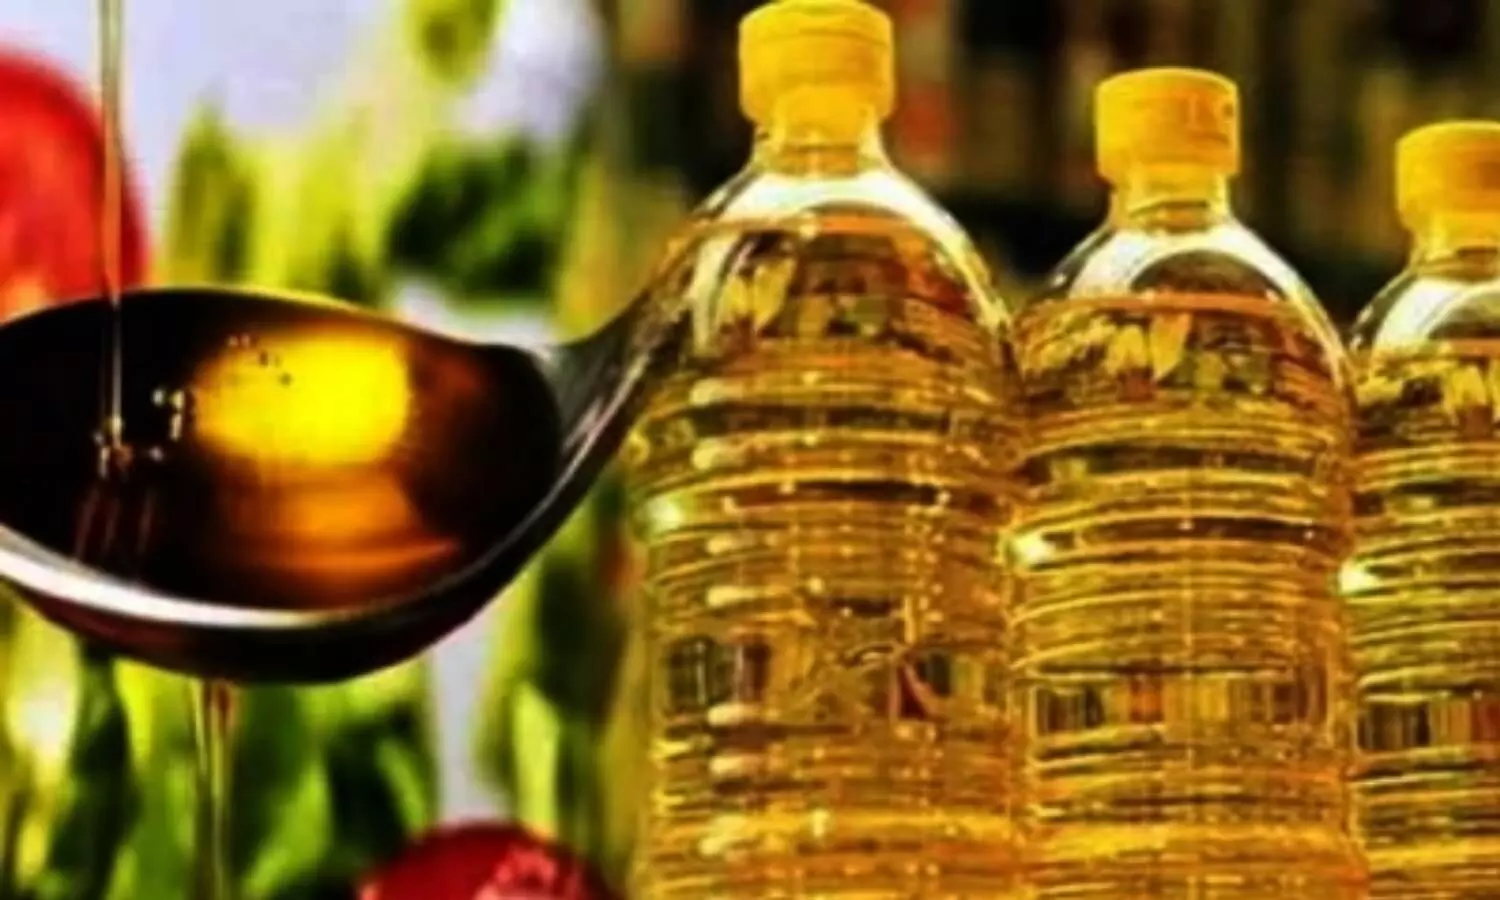 Supply disruptions of sunflower oil lift crude palm oil prices to all-time high